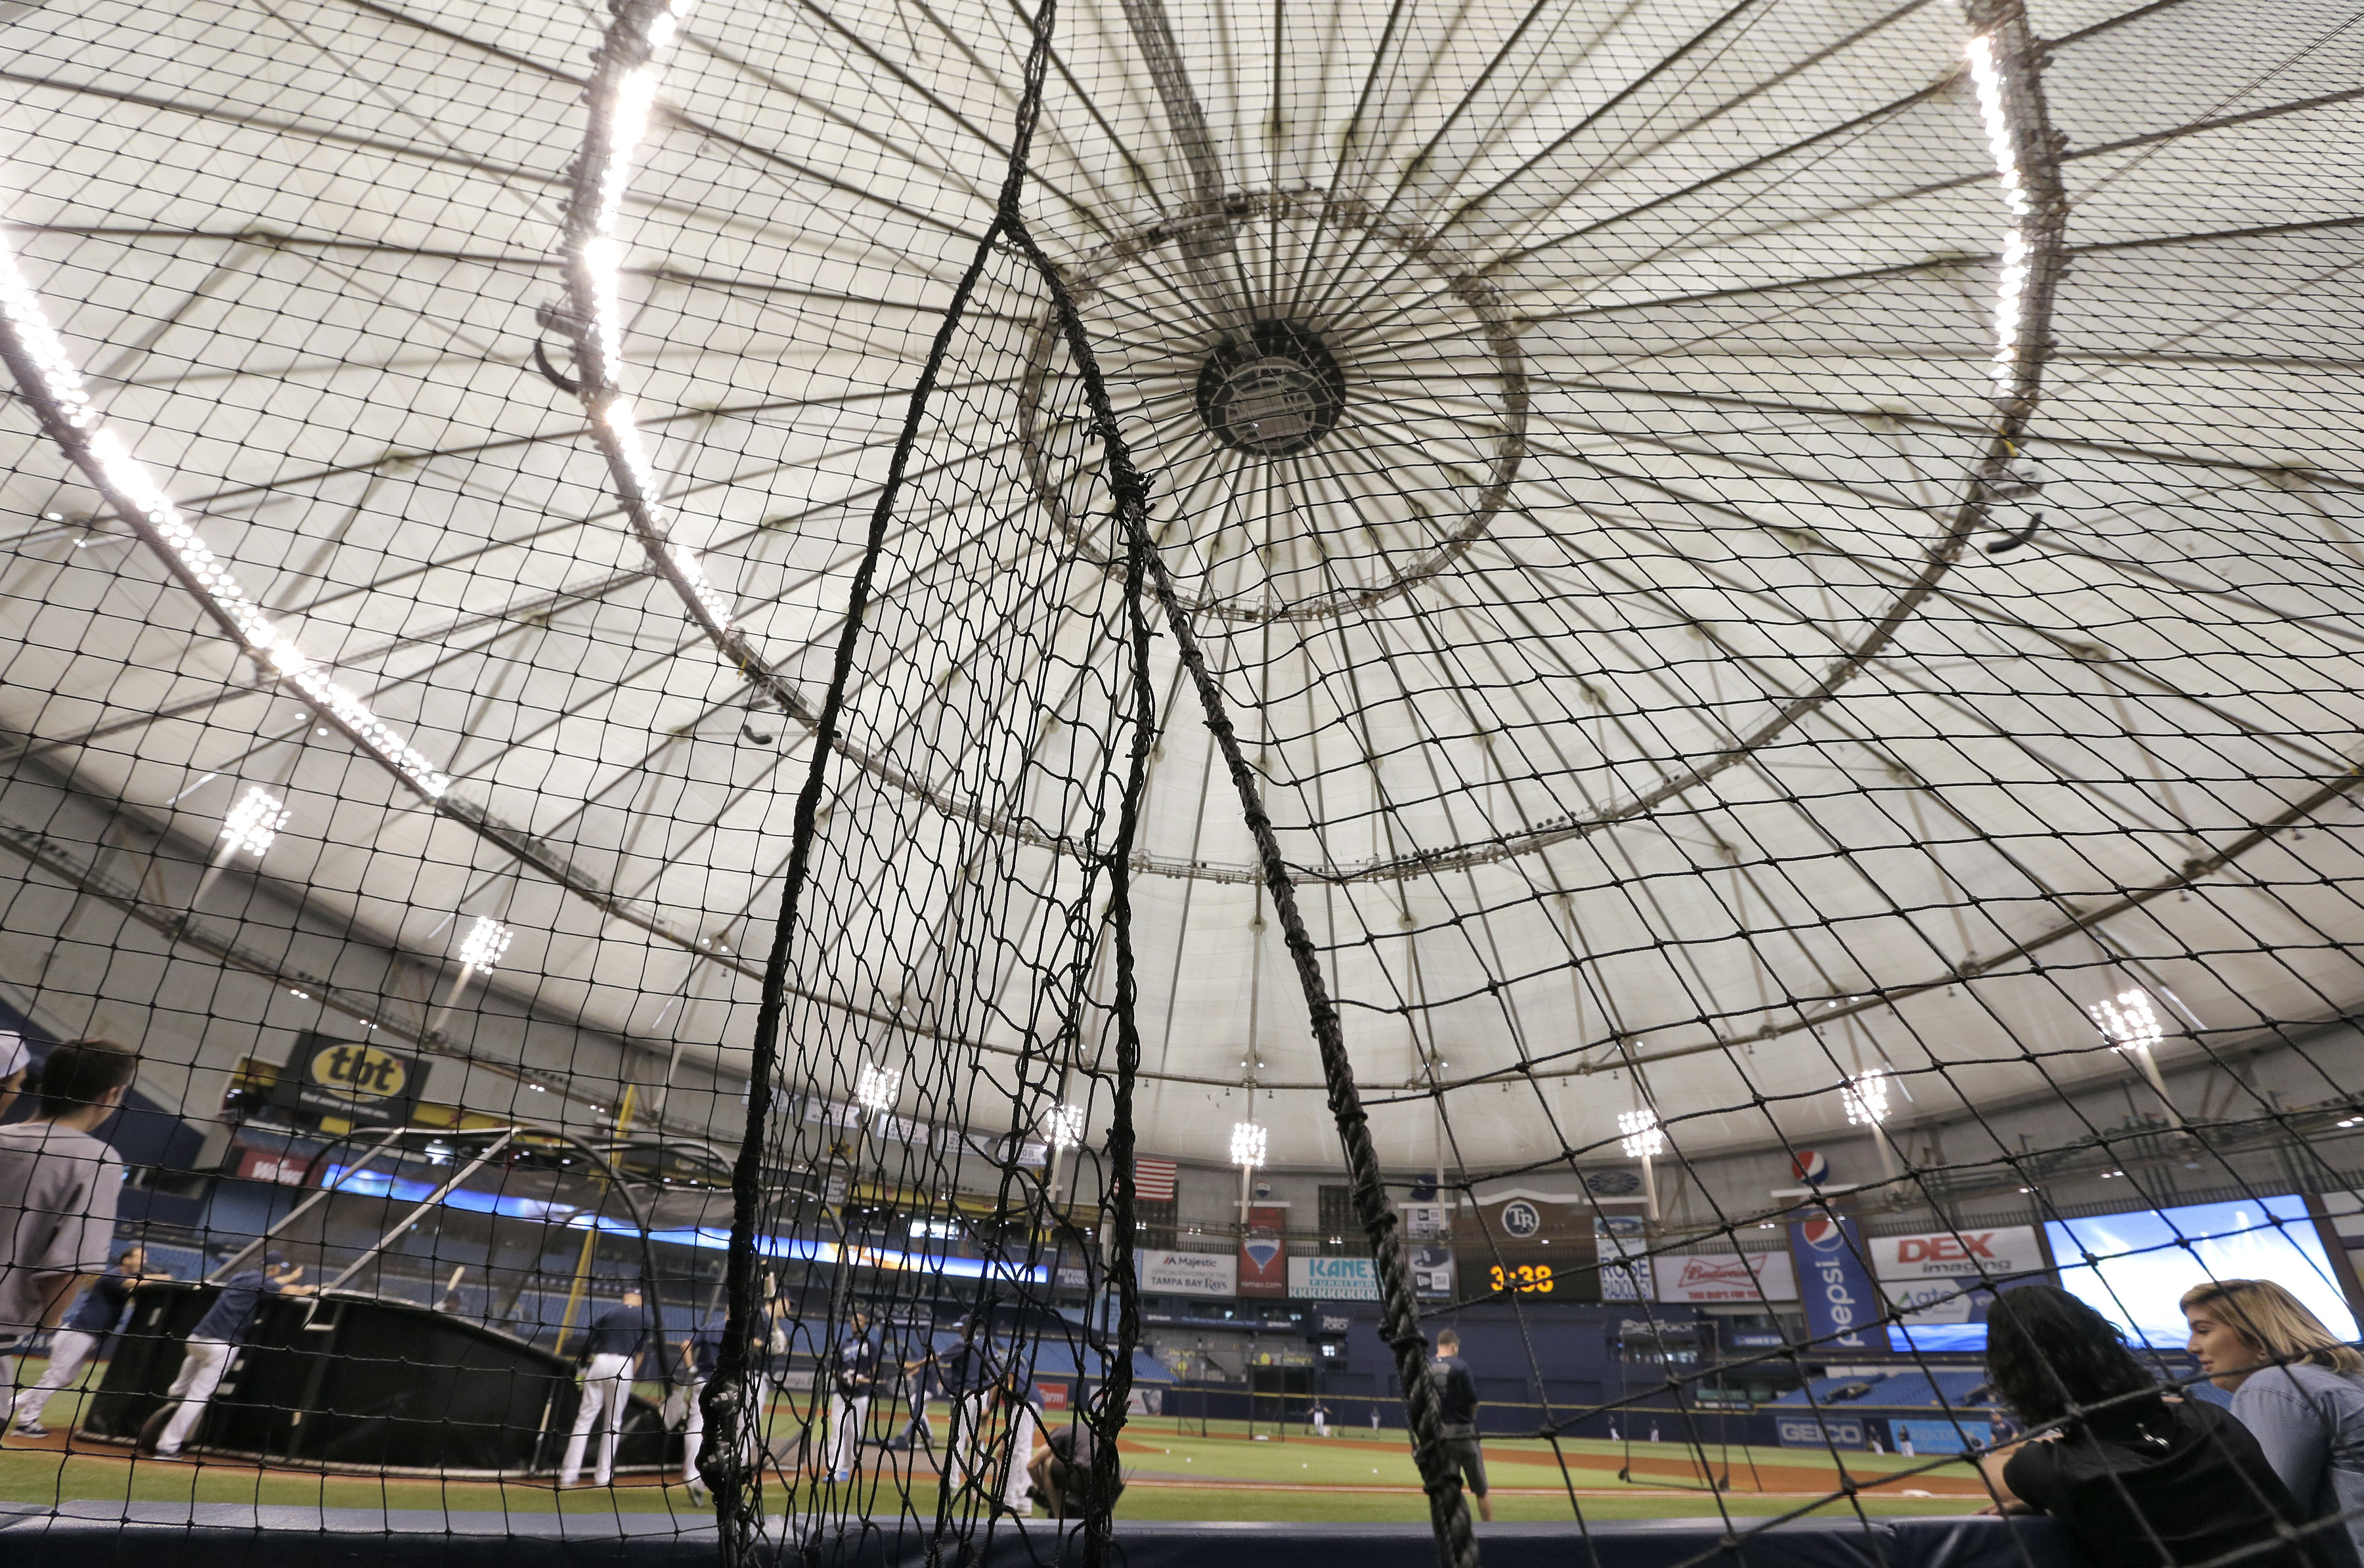 Fan hit by foul ball at Rays game in stable condition